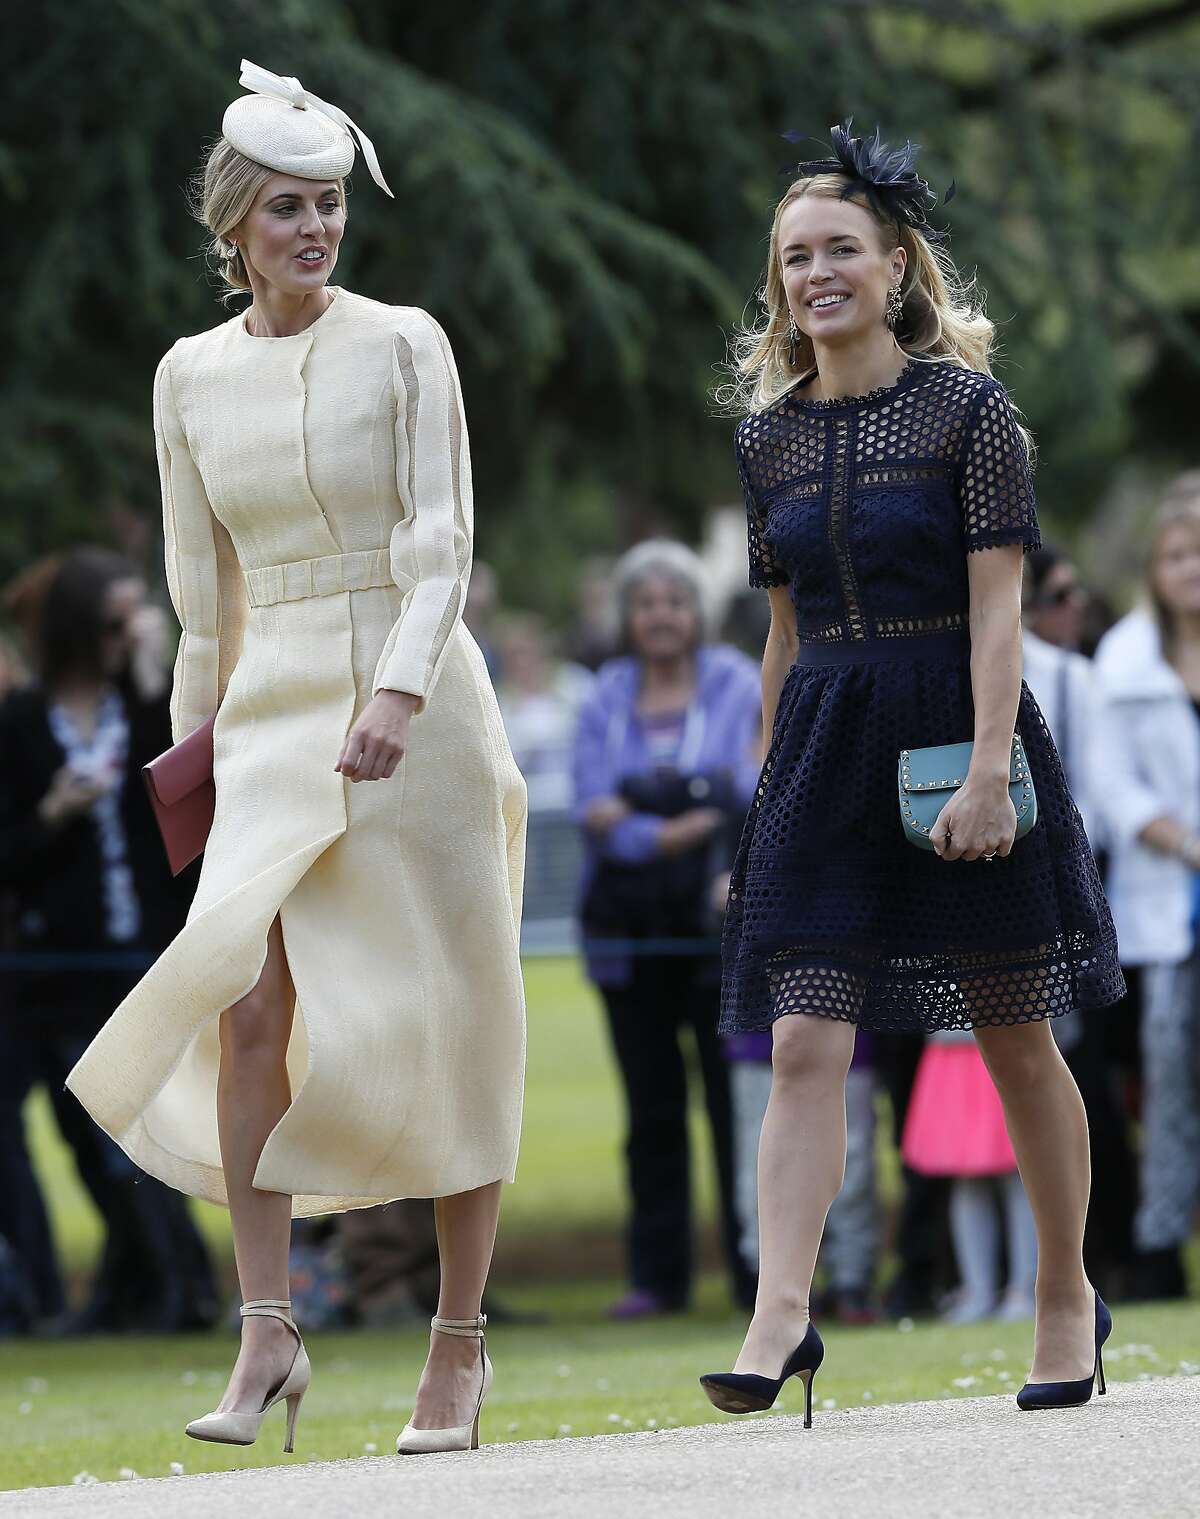 Donna Air, left, arrives at St Mark's Church in Englefield, England, ahead of the wedding of Pippa Middleton and James Matthews, Saturday, May 20, 2017. Middleton, the sister of Kate, Duchess of Cambridge is to marry hedge fund manager James Matthews in a ceremony Saturday where her niece and nephew Prince George and Princess Charlotte are in the wedding party, along with sister Kate and princes Harry and William. (AP Photo/Kirsty Wigglesworth, Pool)